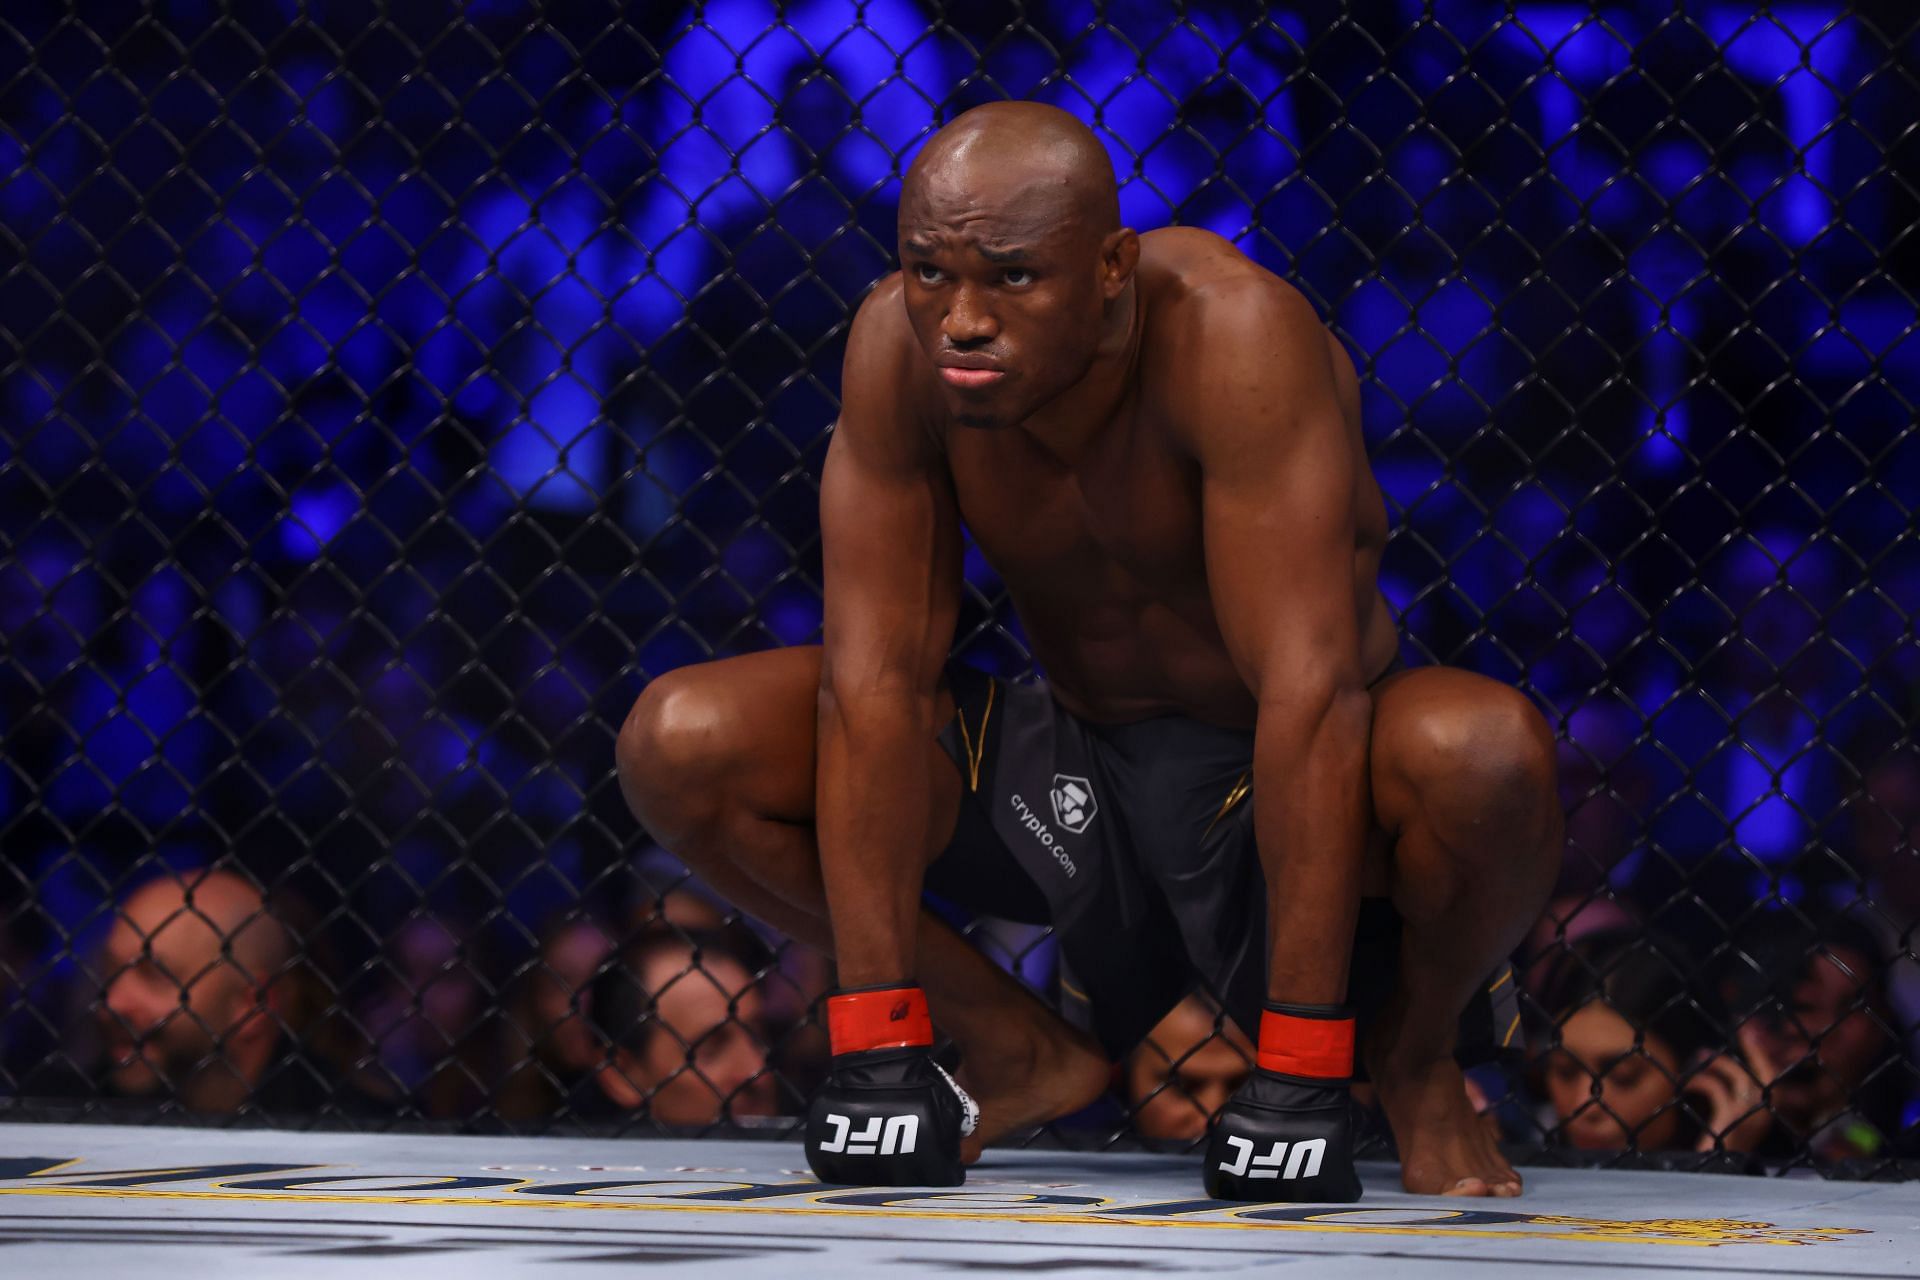 Beating McGregor would make Kamaru Usman a lot of money, but wouldn&#039;t benefit his legacy